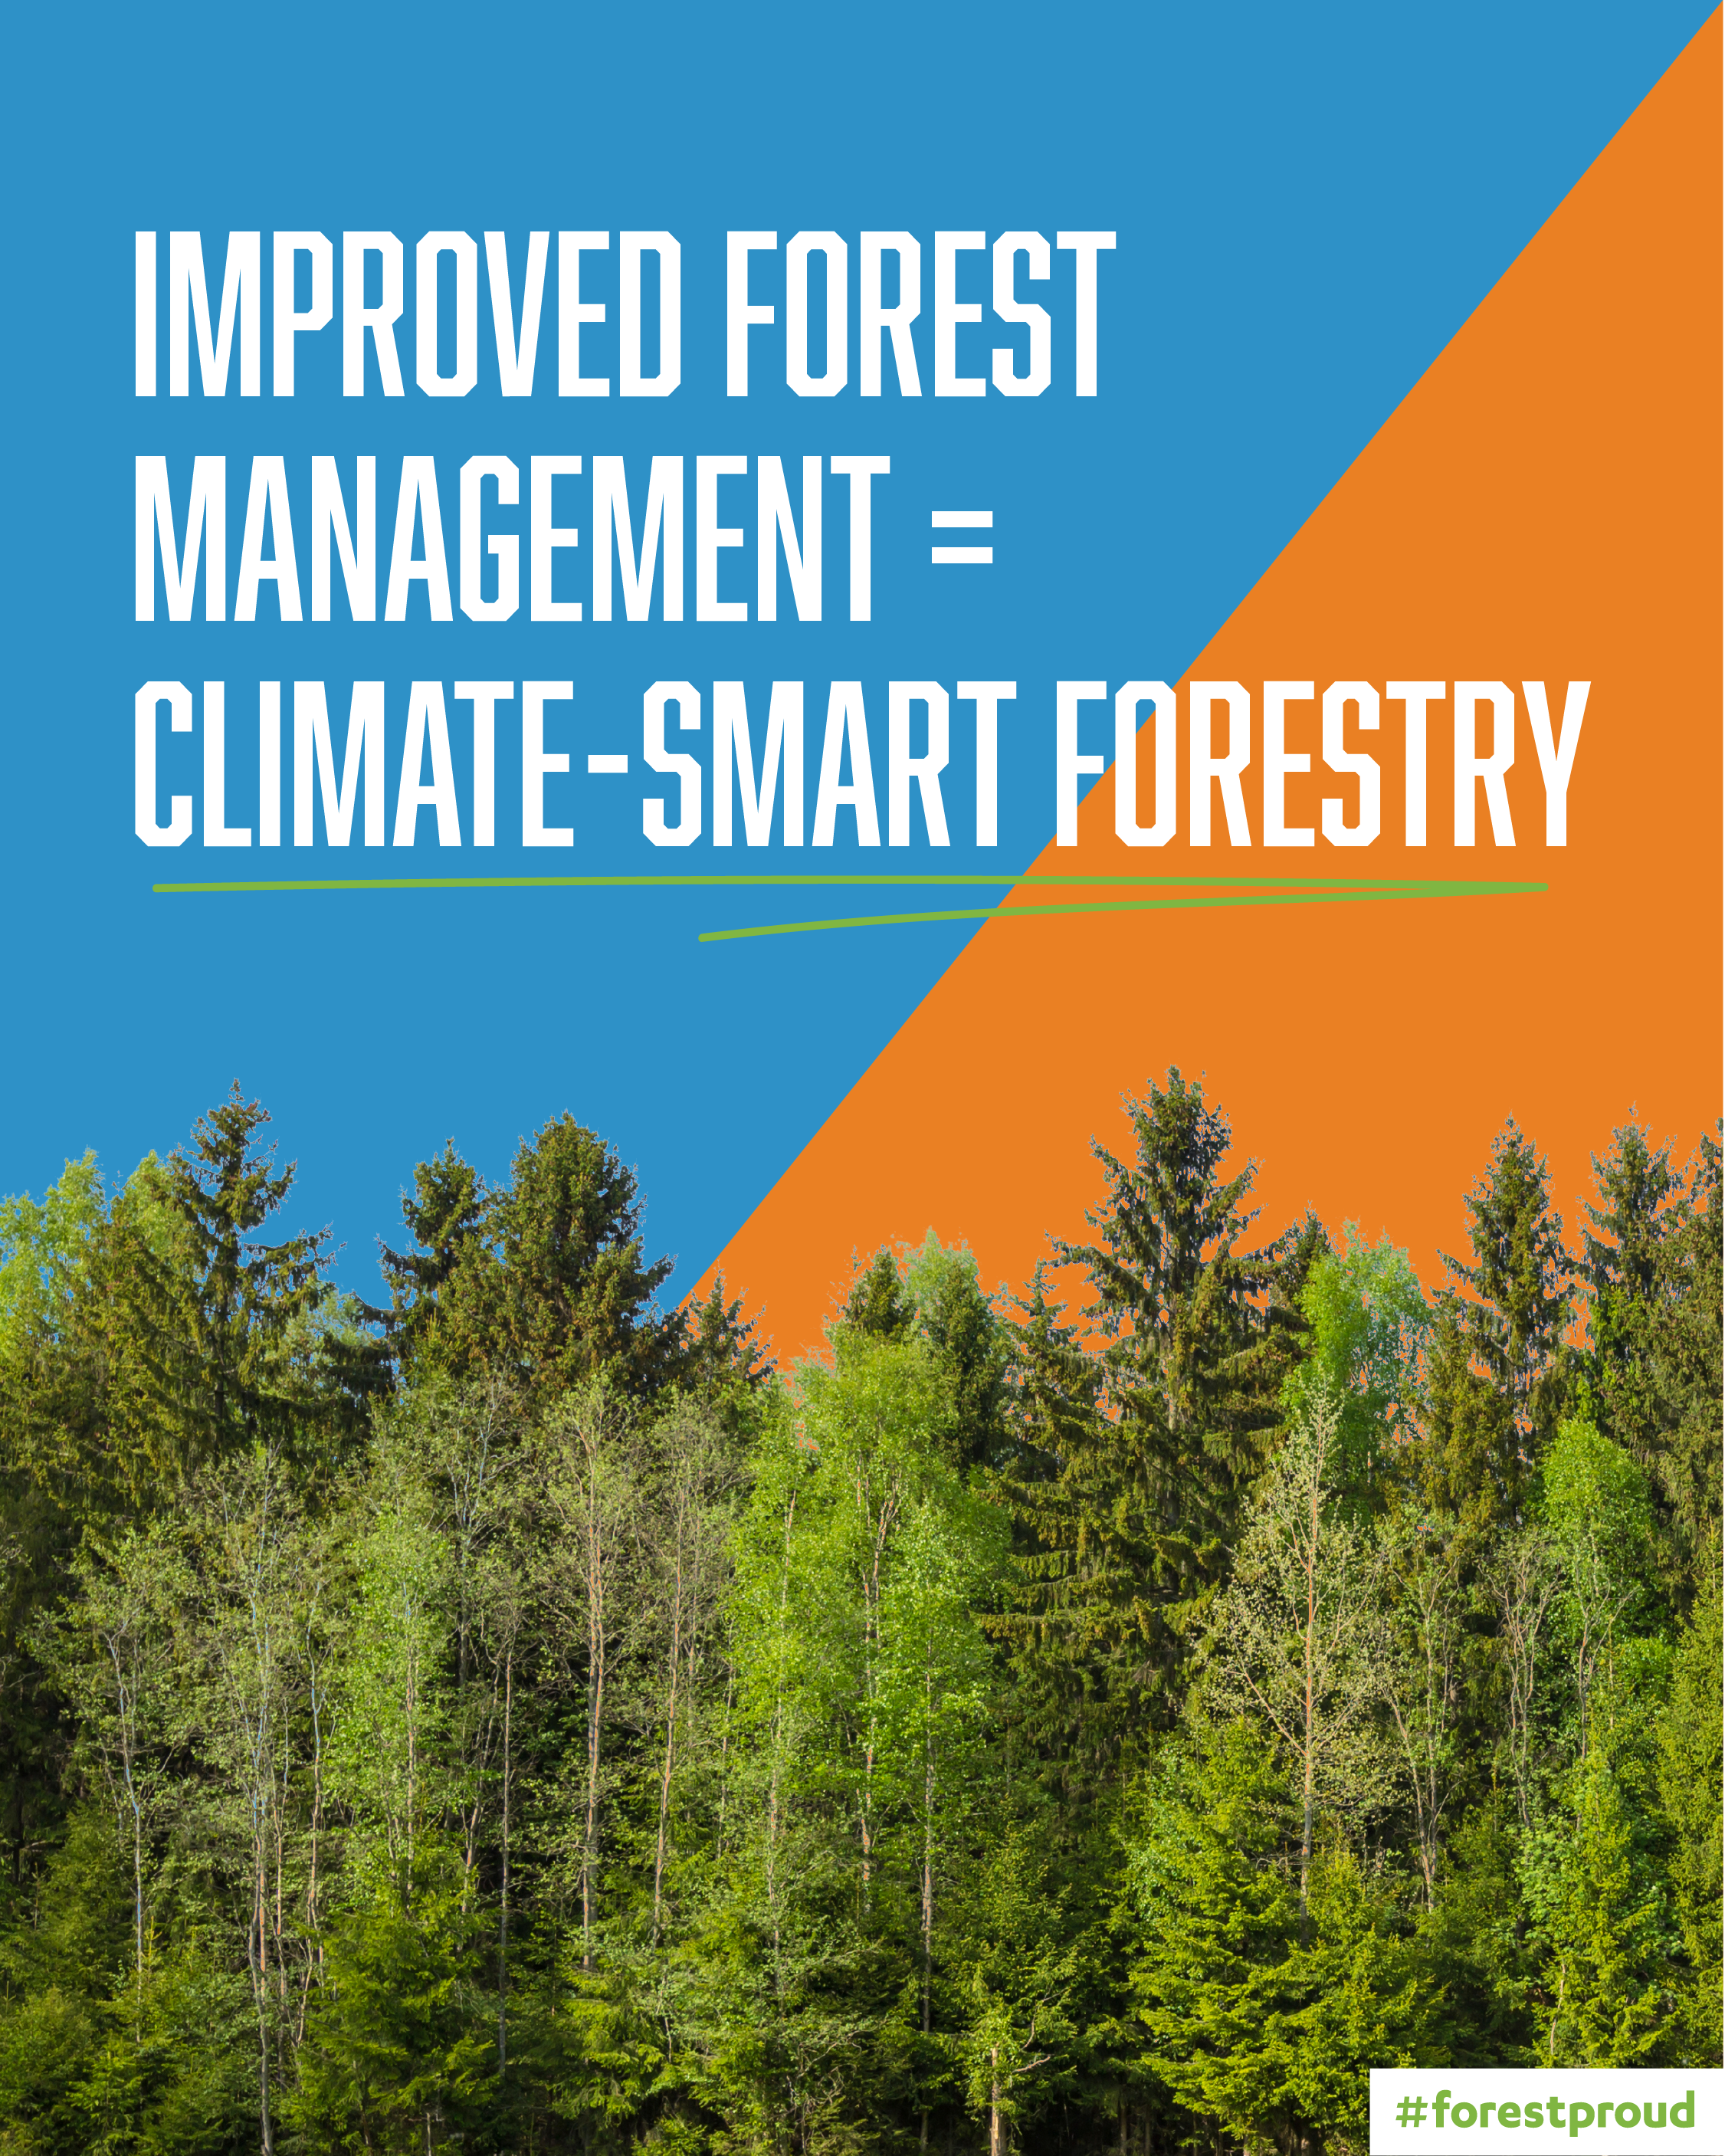 What is Climate Smart Forestry?